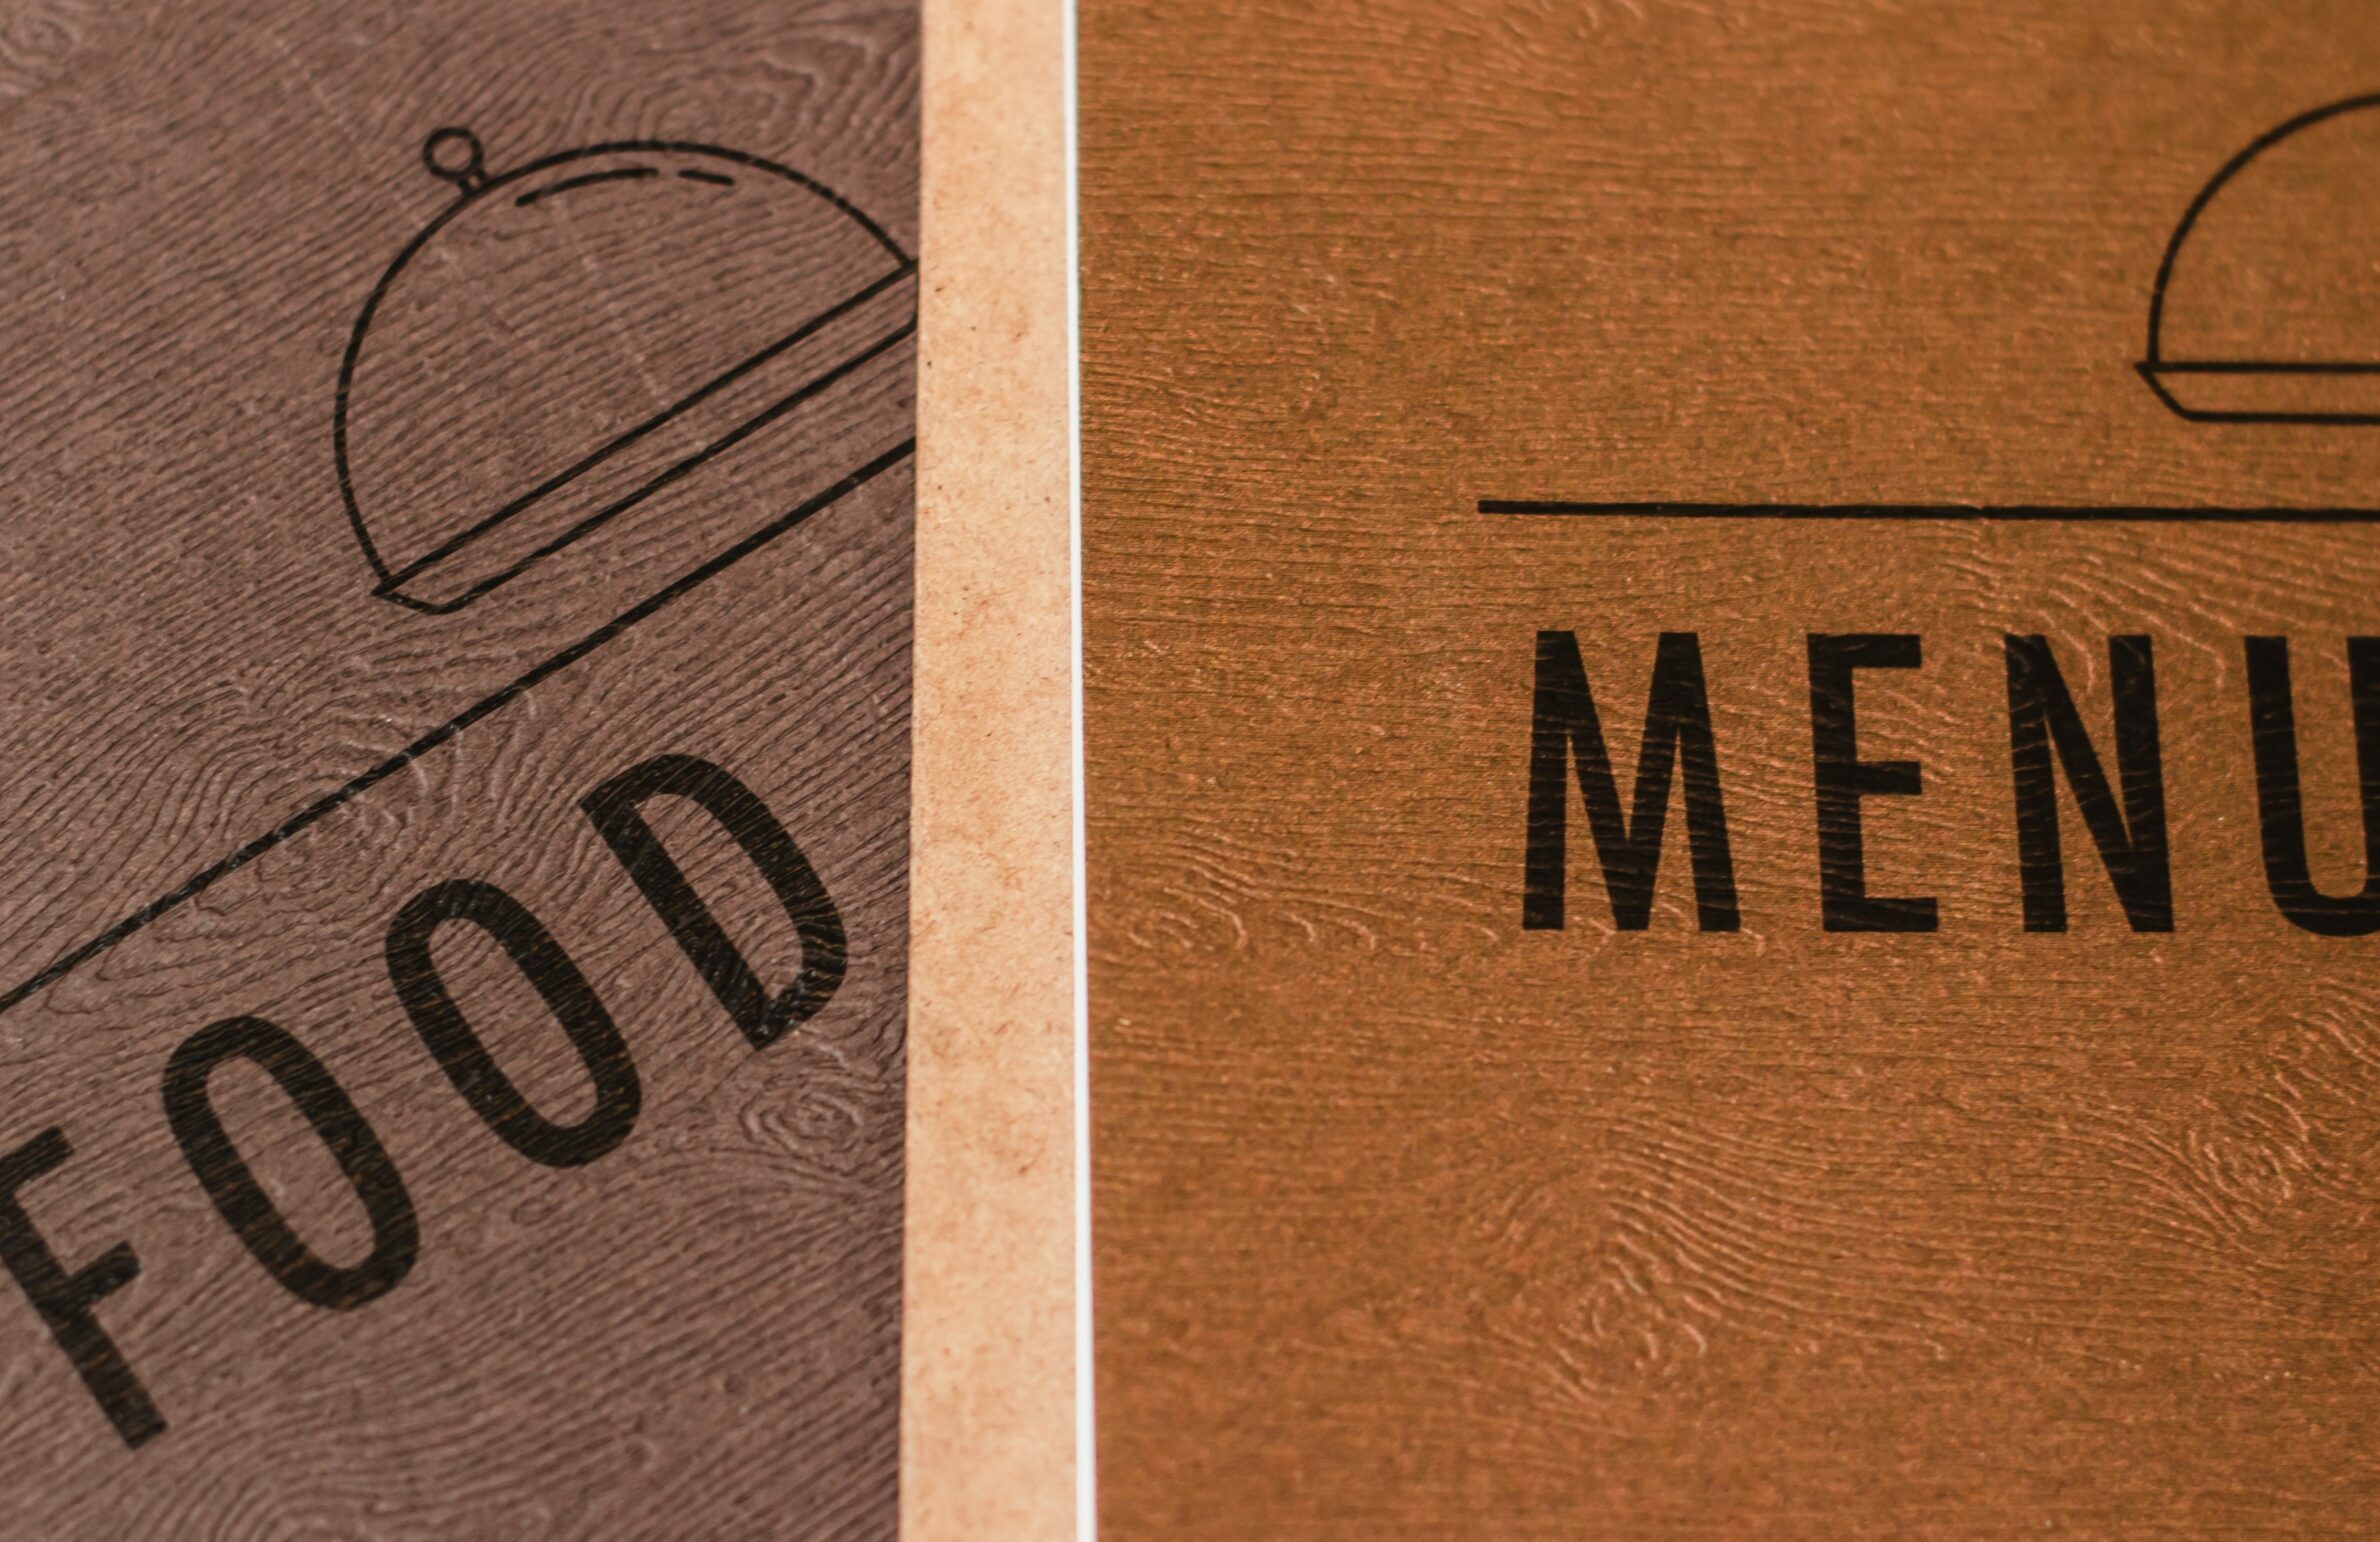 A printed food menu with an icon of a cloche on the front